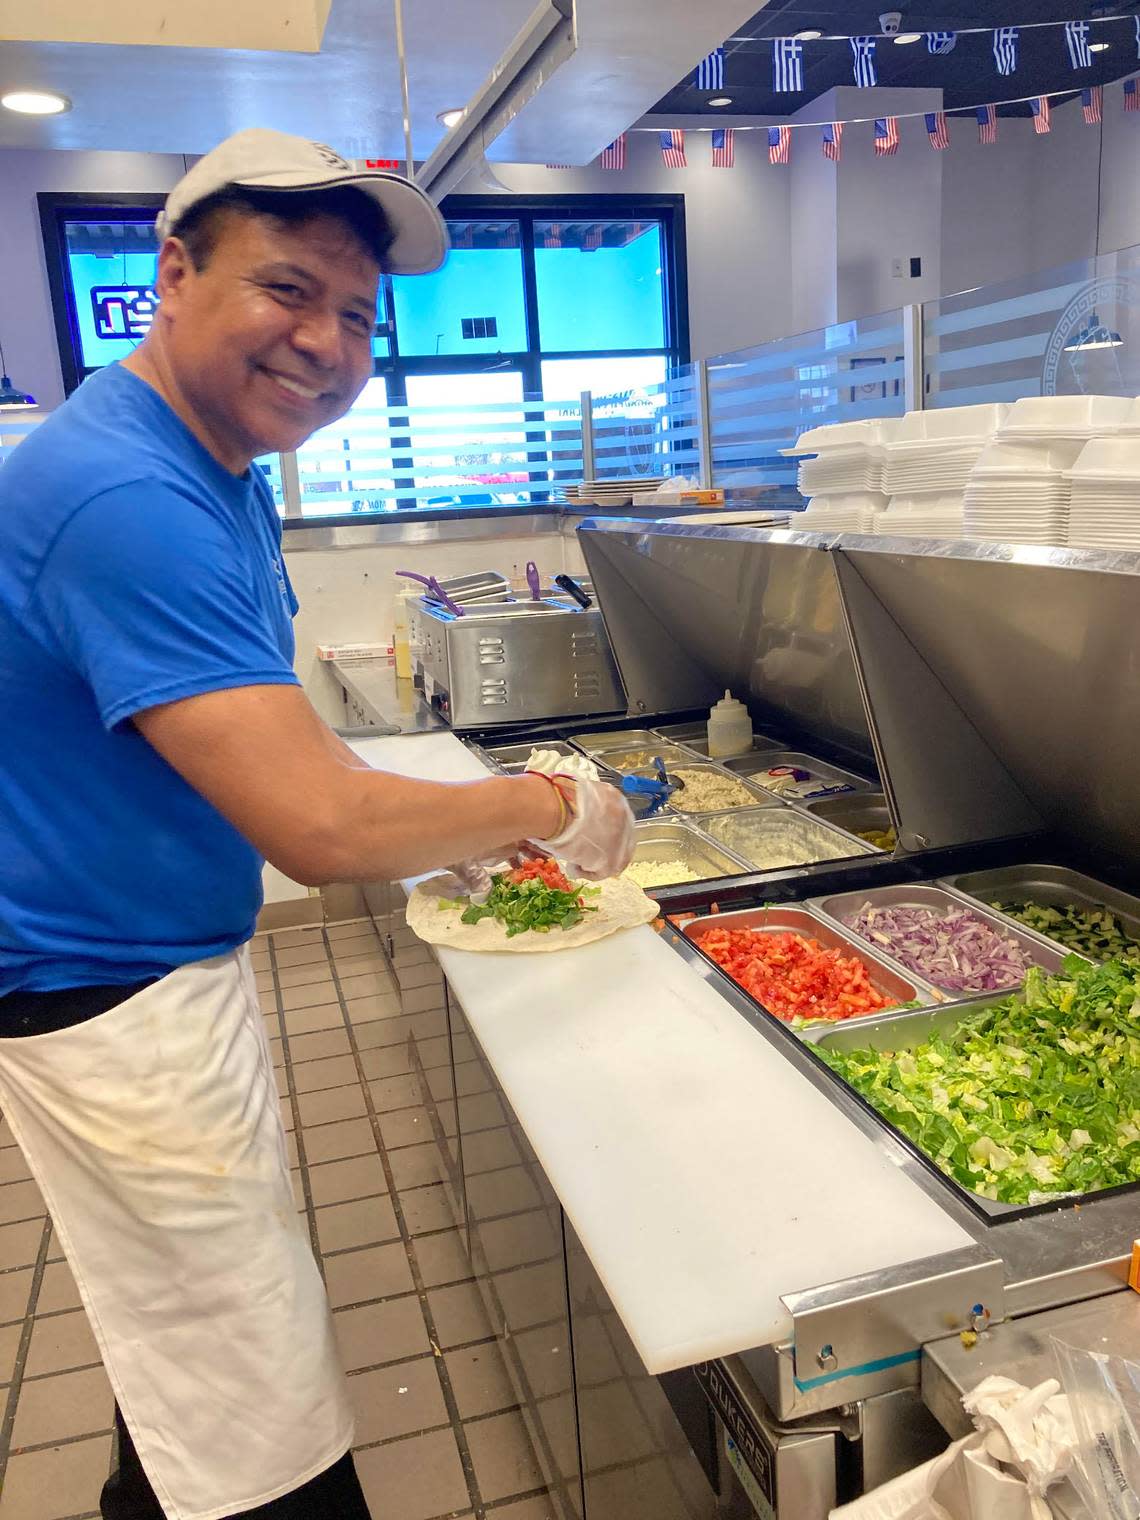 Nabor Gutierrez prepares food at Olympia Gyros at 670 Lake Joy Road, Suite 150, in Warner Robins. He is the chef, manager and owner of the new restaurant.